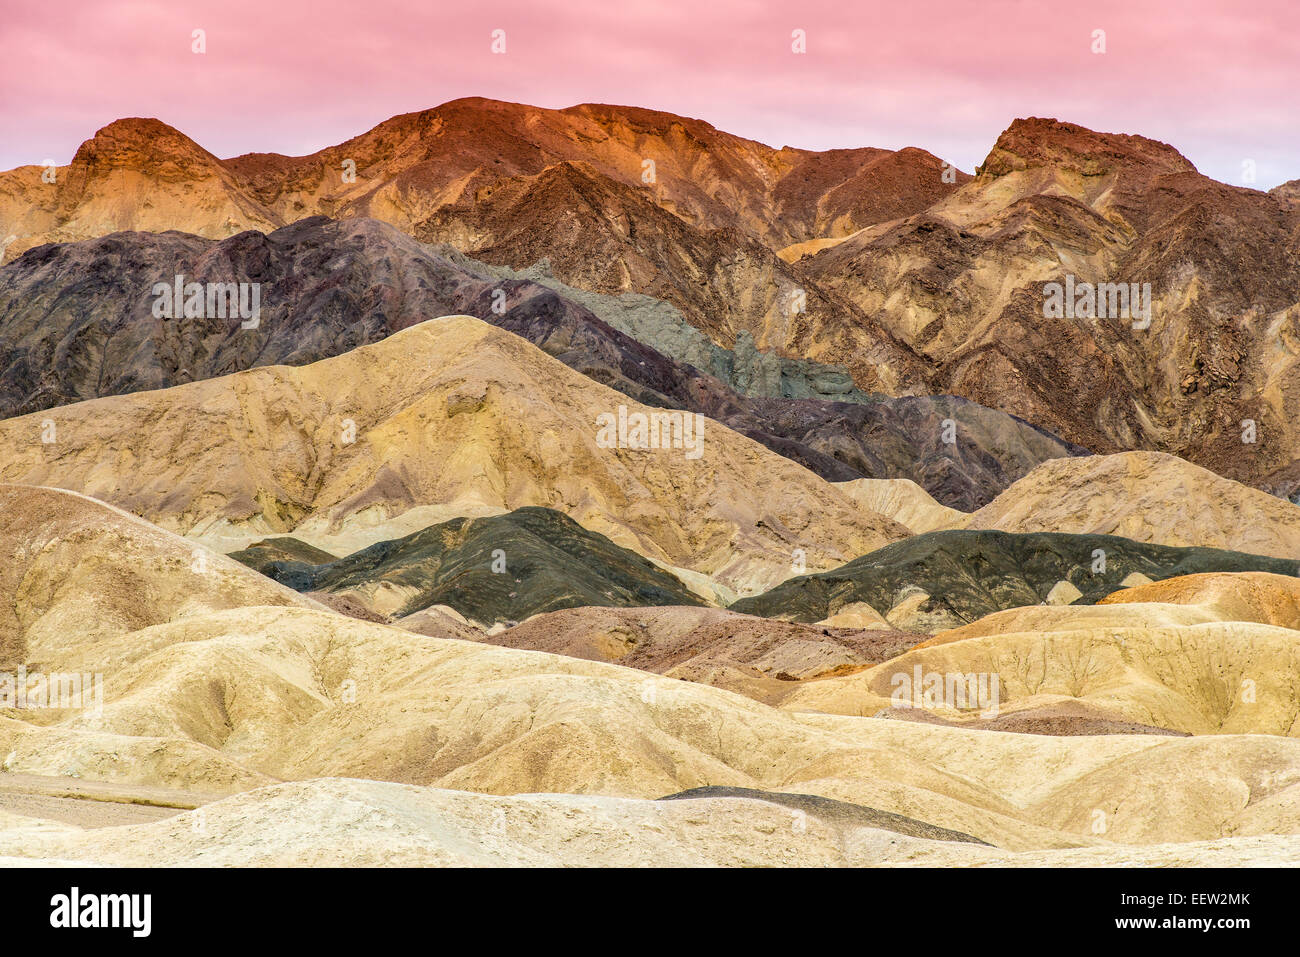 Scenic view over multicolored badlands at Twenty Mule Team Canyon, Death Valley National Park, California, USA Stock Photo